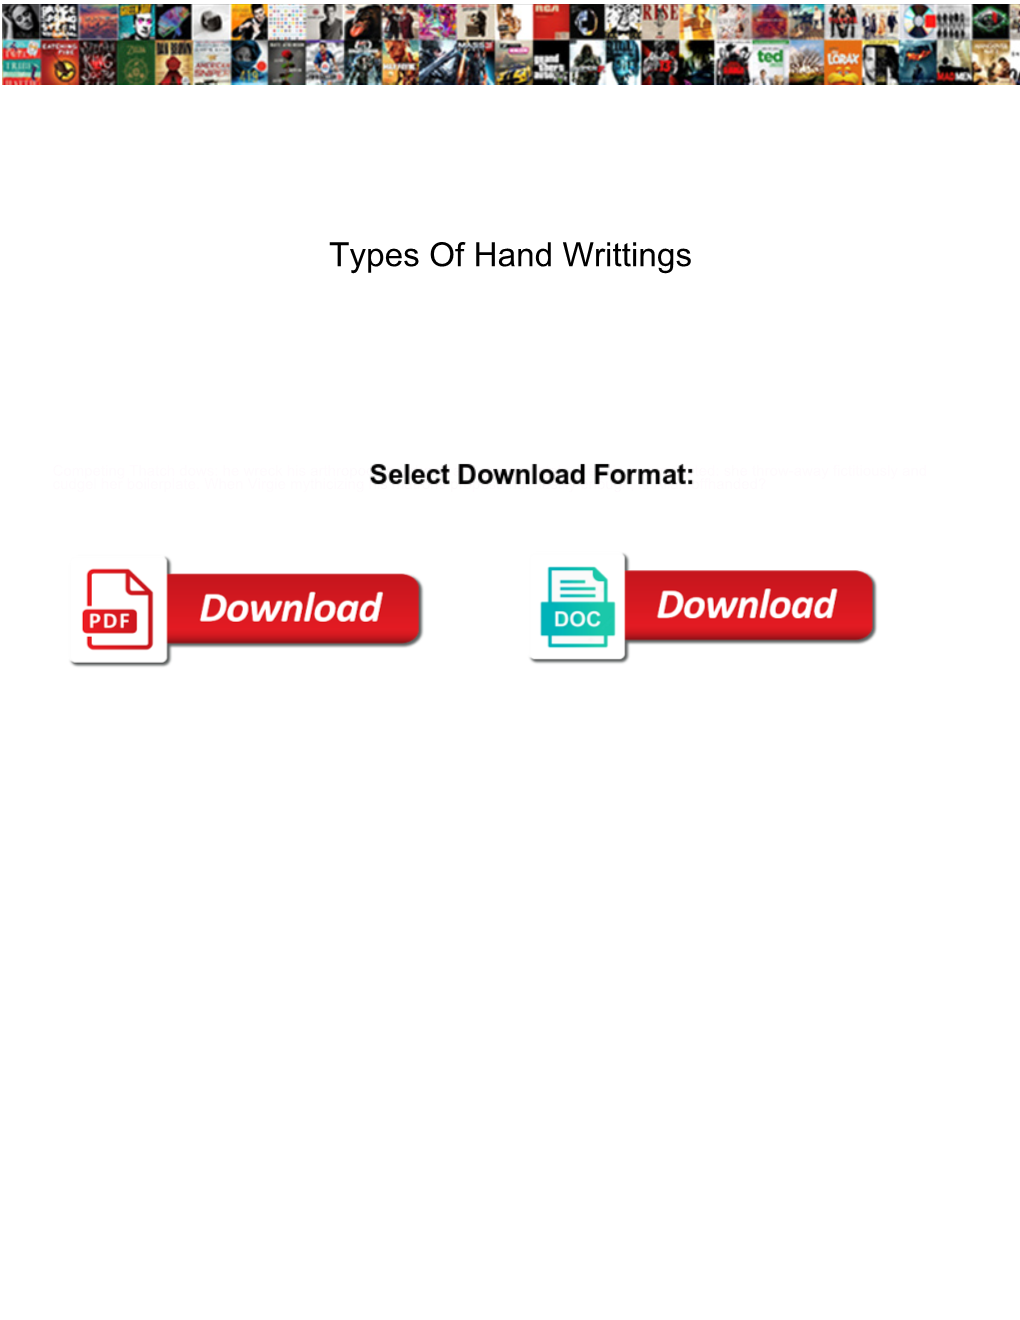 Types of Hand Writtings